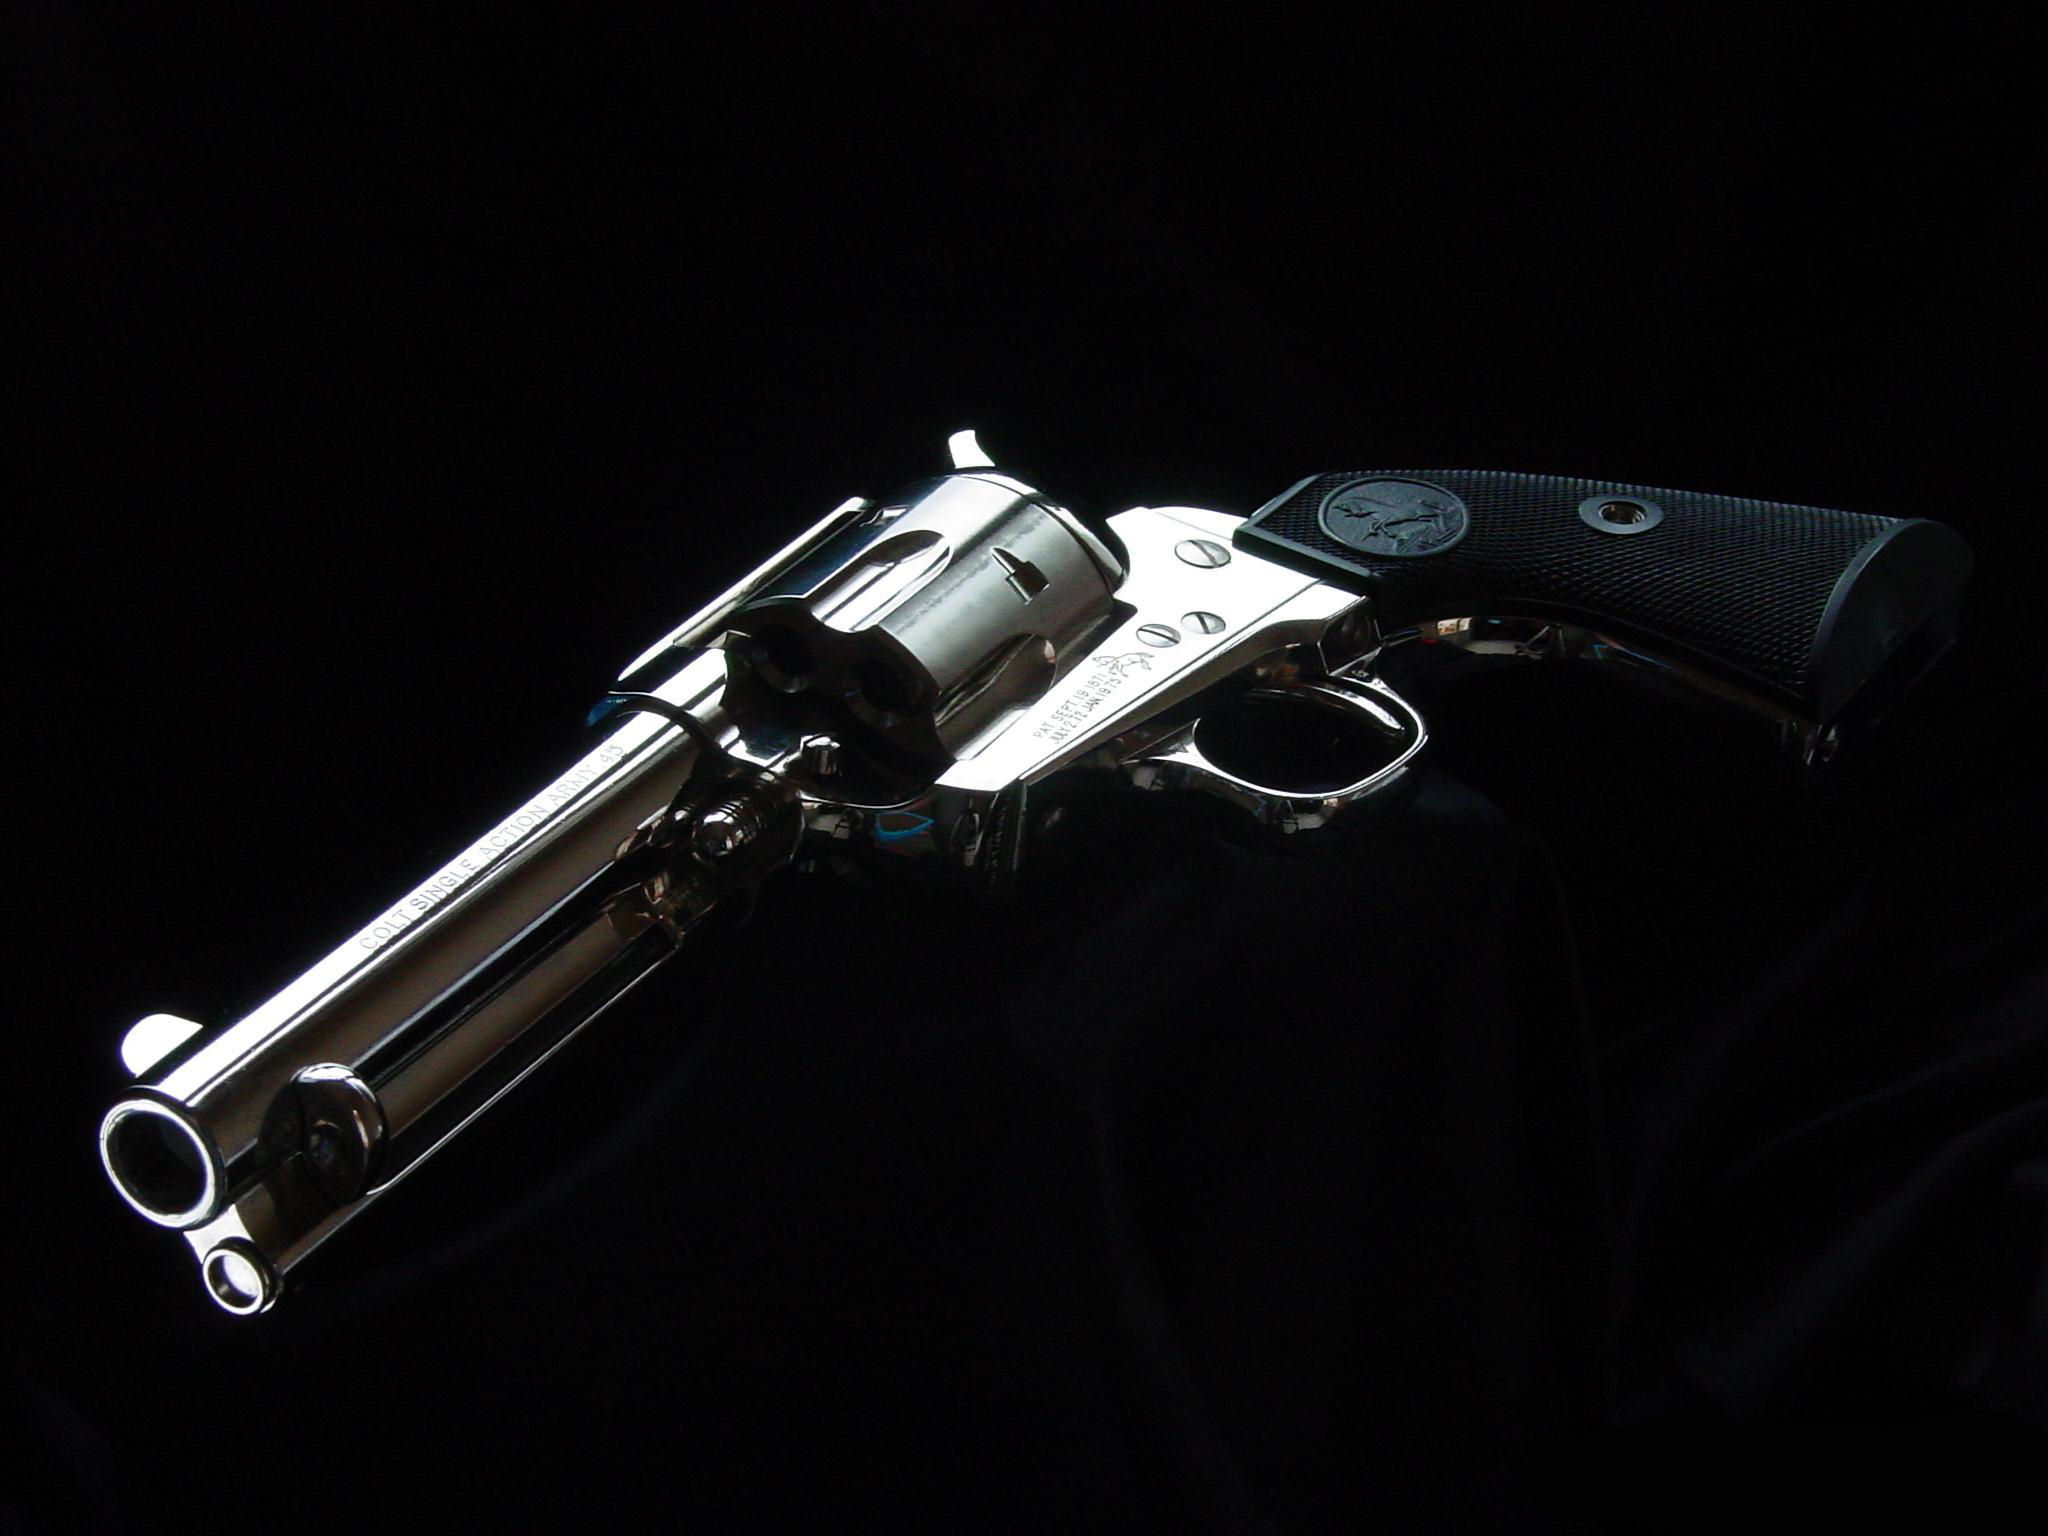 24 Colt Revolver HD Wallpapers Backgrounds - Wallpaper Abyss